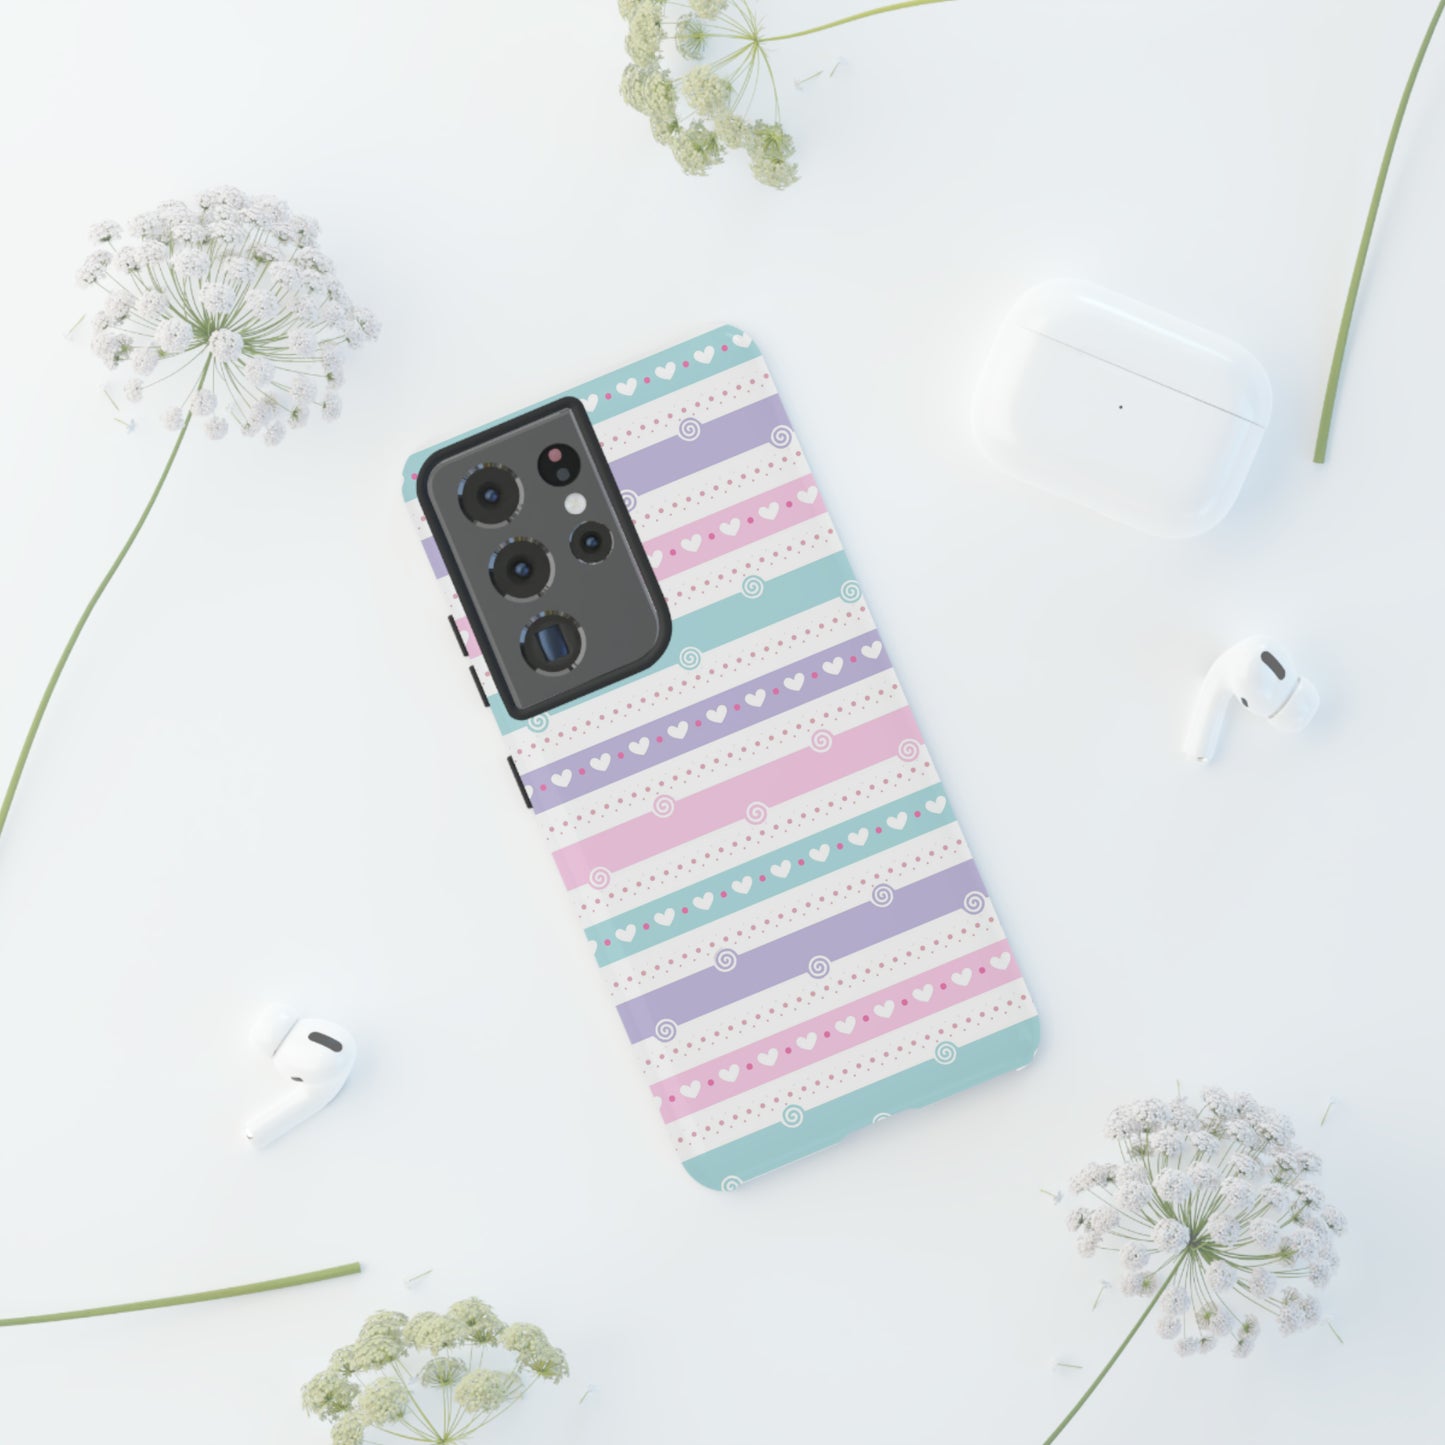 Pastel Stripes and Hearts print design Tough Phone Case compatible with a large variety of Samsung models